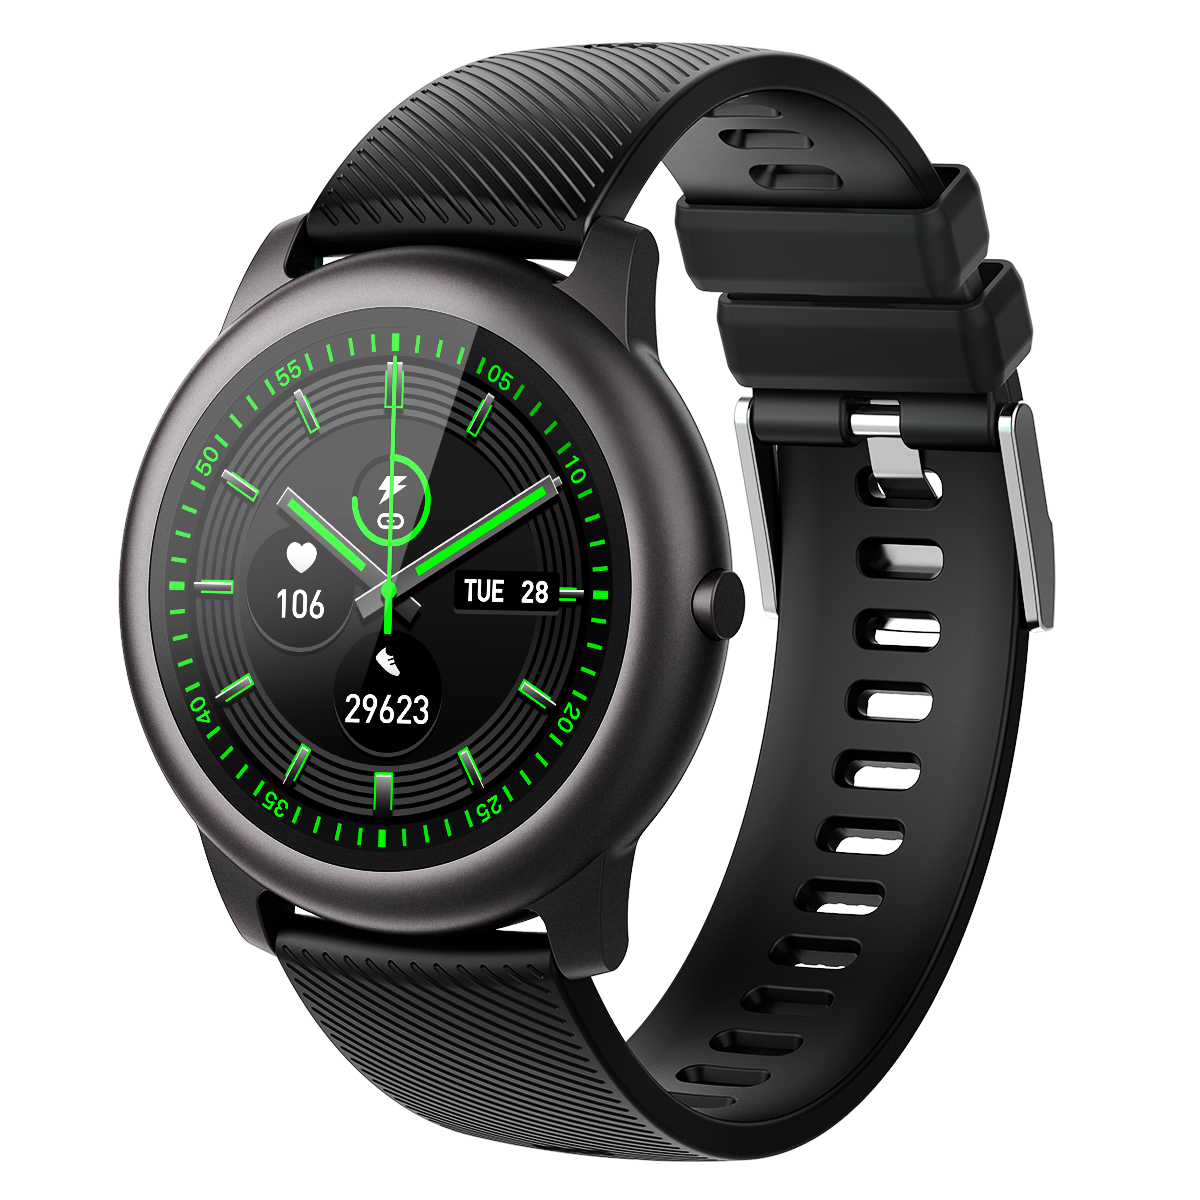 Find ELEGIANT C530 1 3 inch Full Touch Screen Heart Rate Sleep Monitor 50 Days Standby Customize Watch Faces IP68 Waterproof Smart Watch for Sale on Gipsybee.com with cryptocurrencies